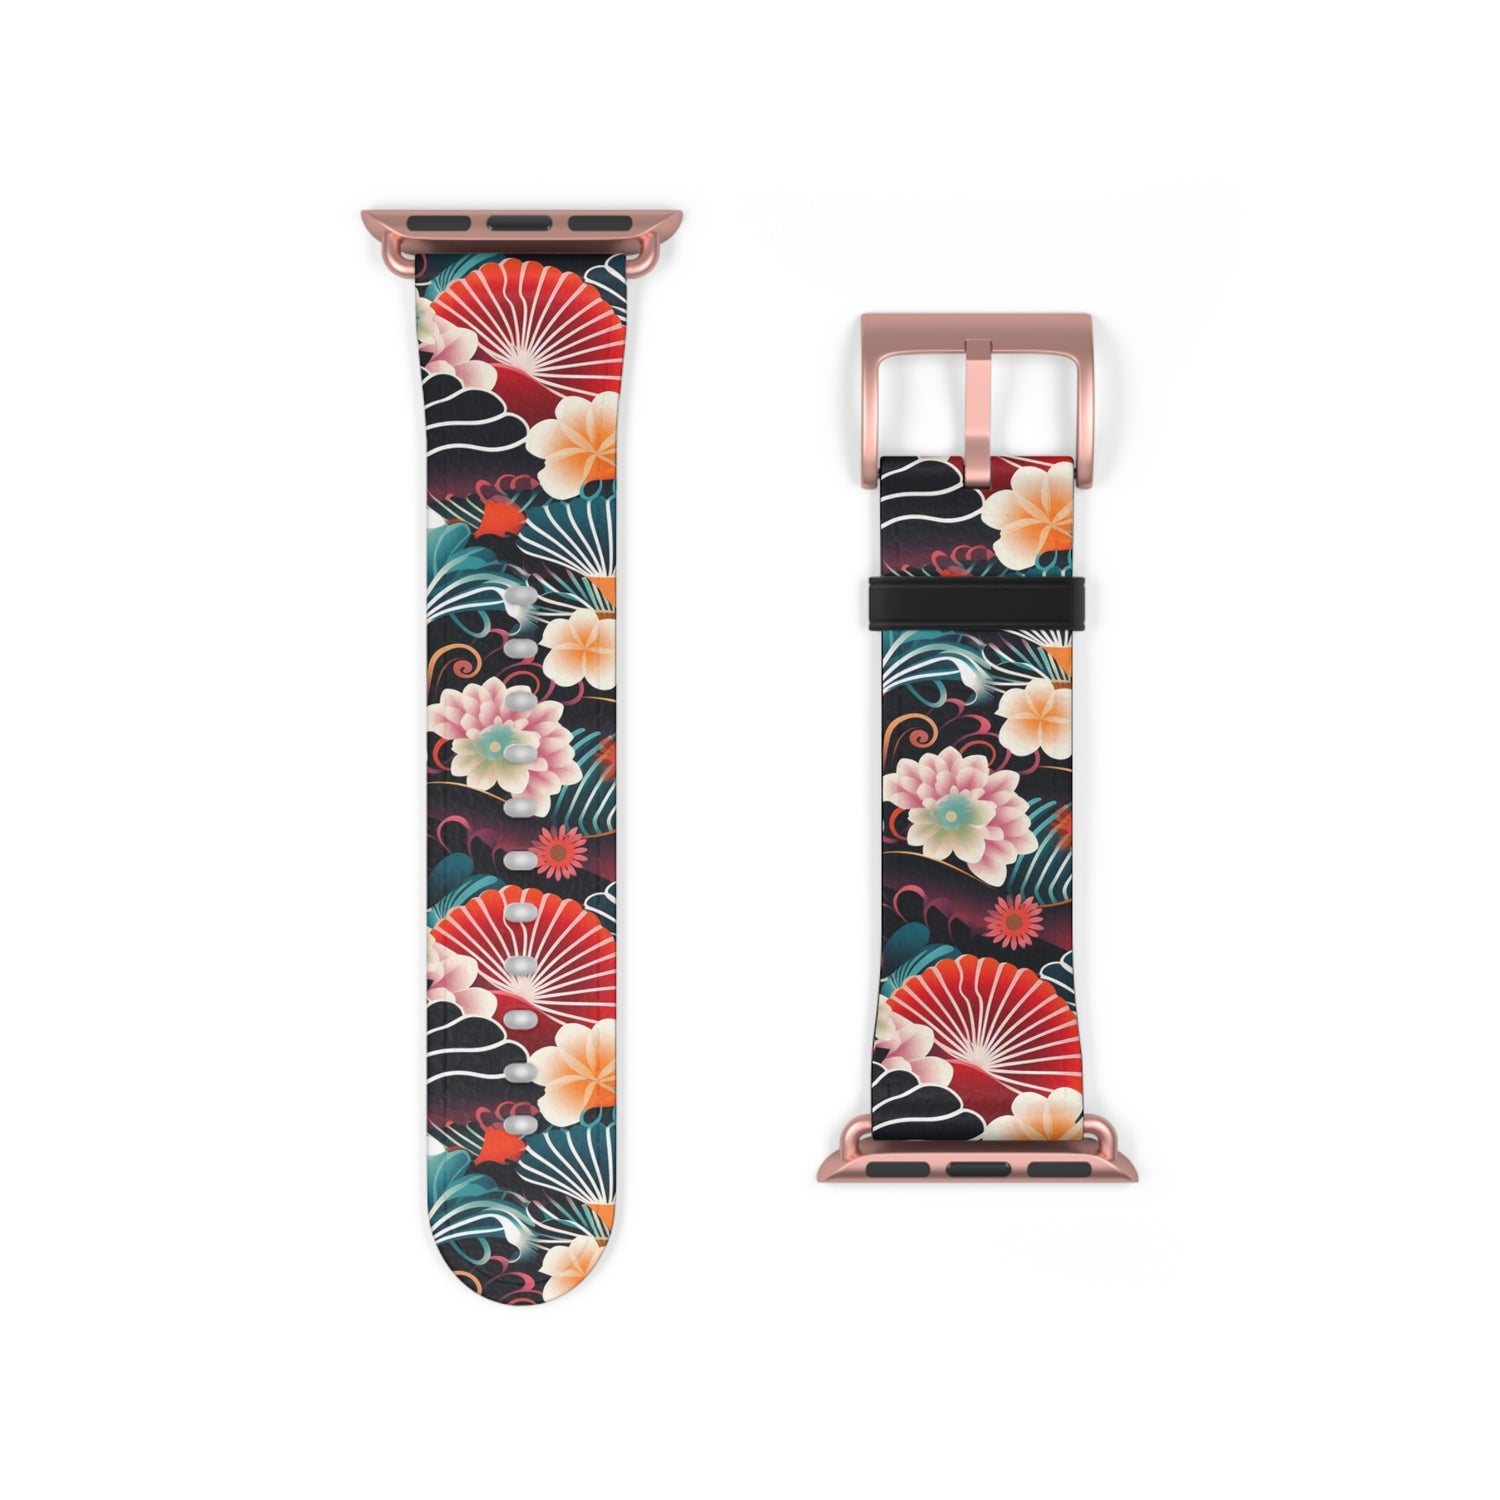 Japanese Origami Watch Band